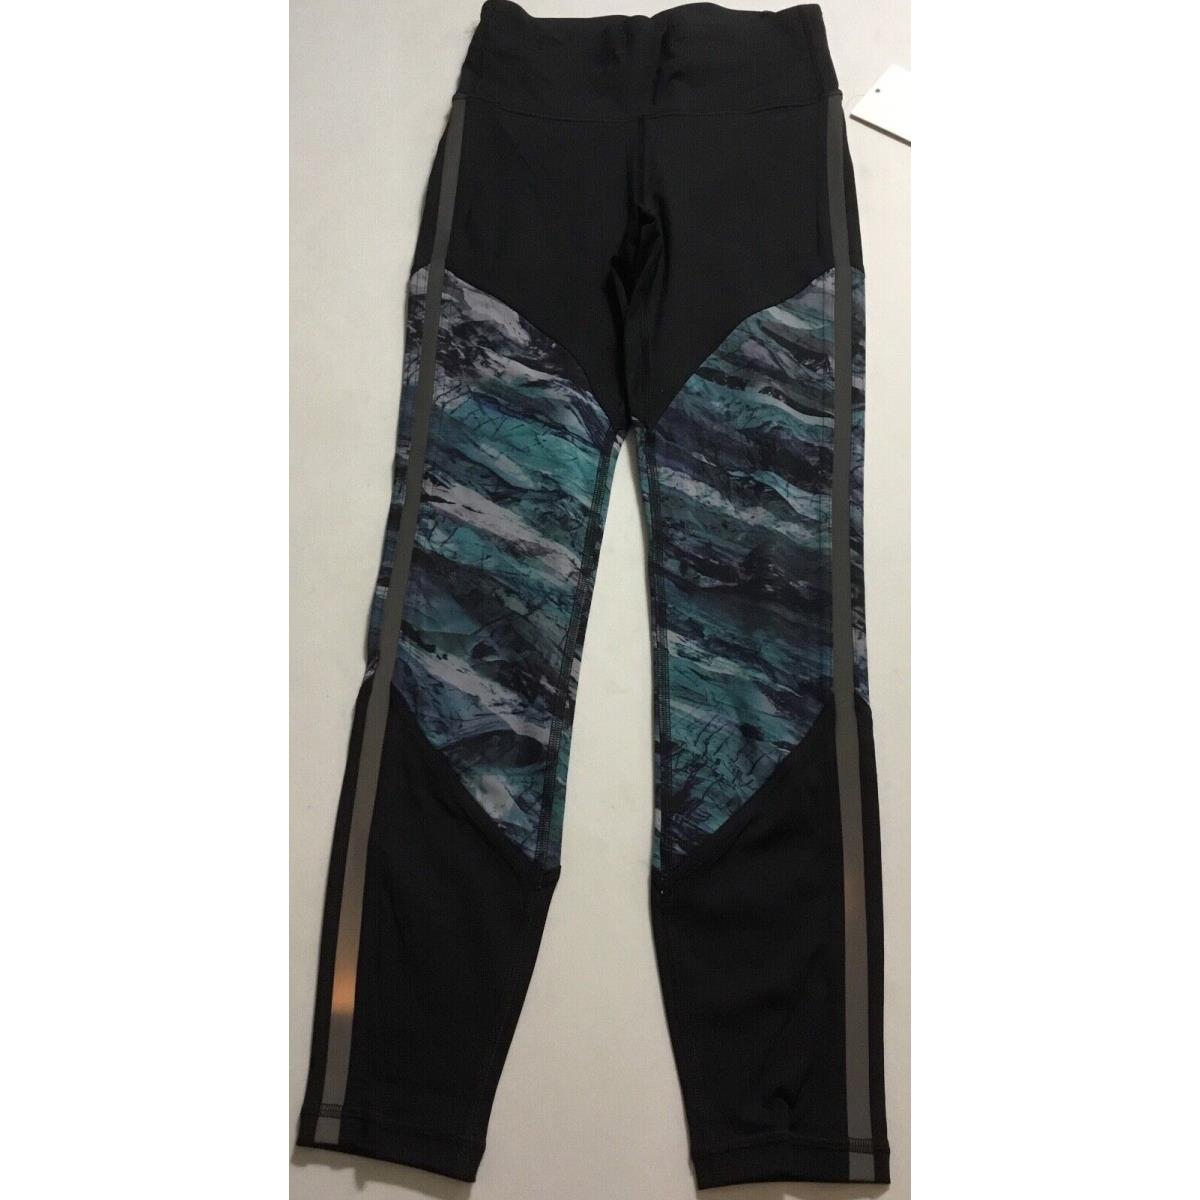 Lululemon Women s Run to Reset Tight 25 Nulux LW5BWQS Blk/fism Size 2